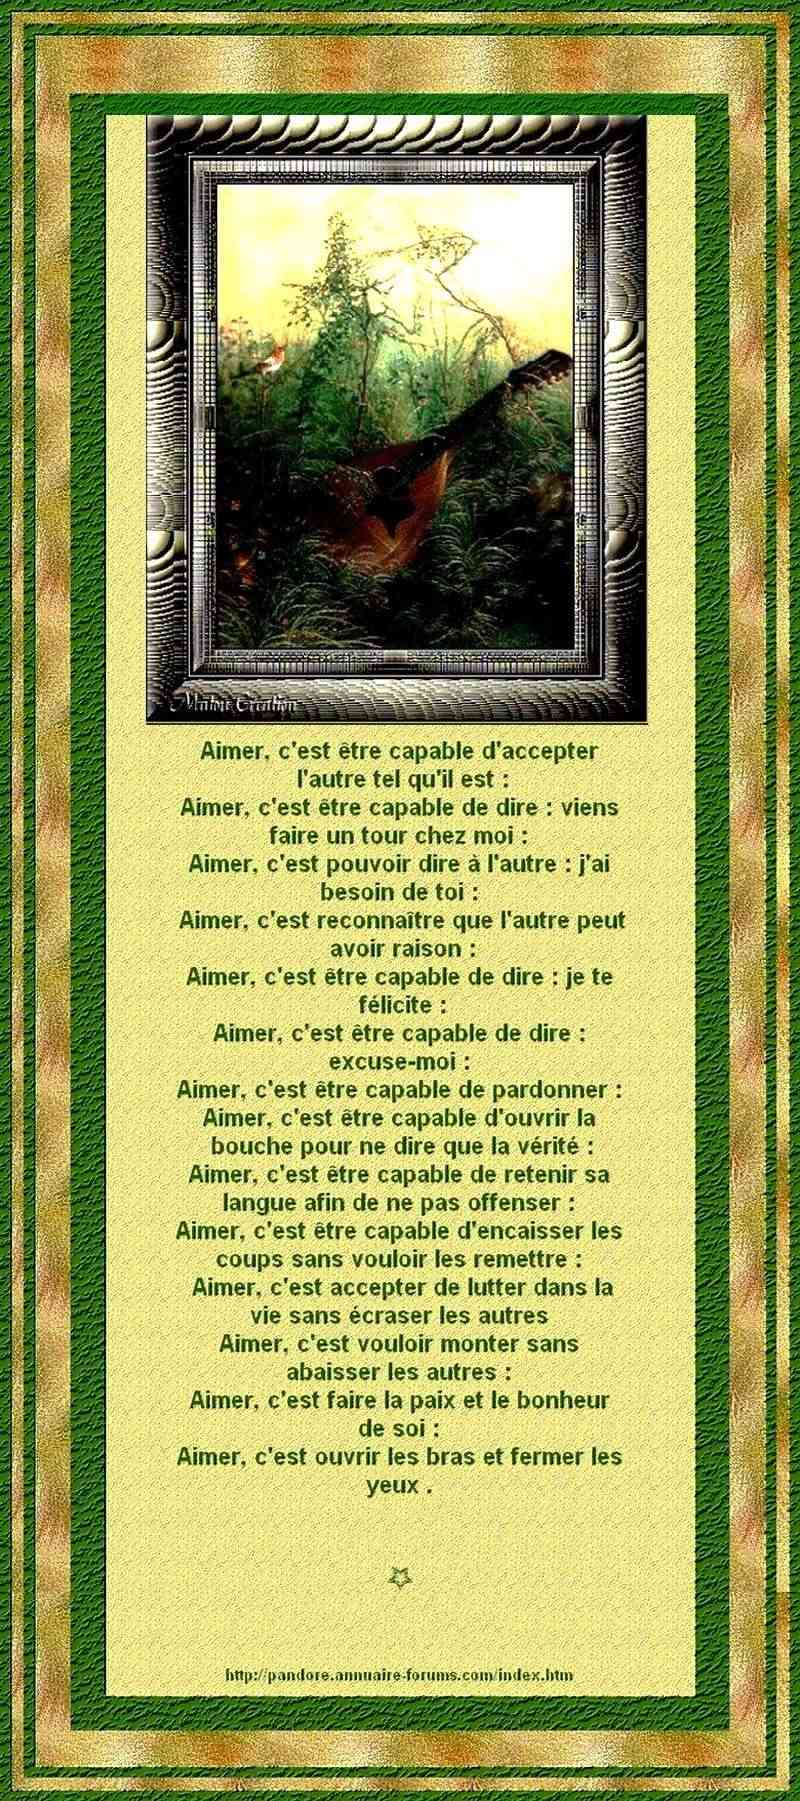 ARCHIVES DE POESIES ET TEXTES N° 1 - Page 7 11aaaa12